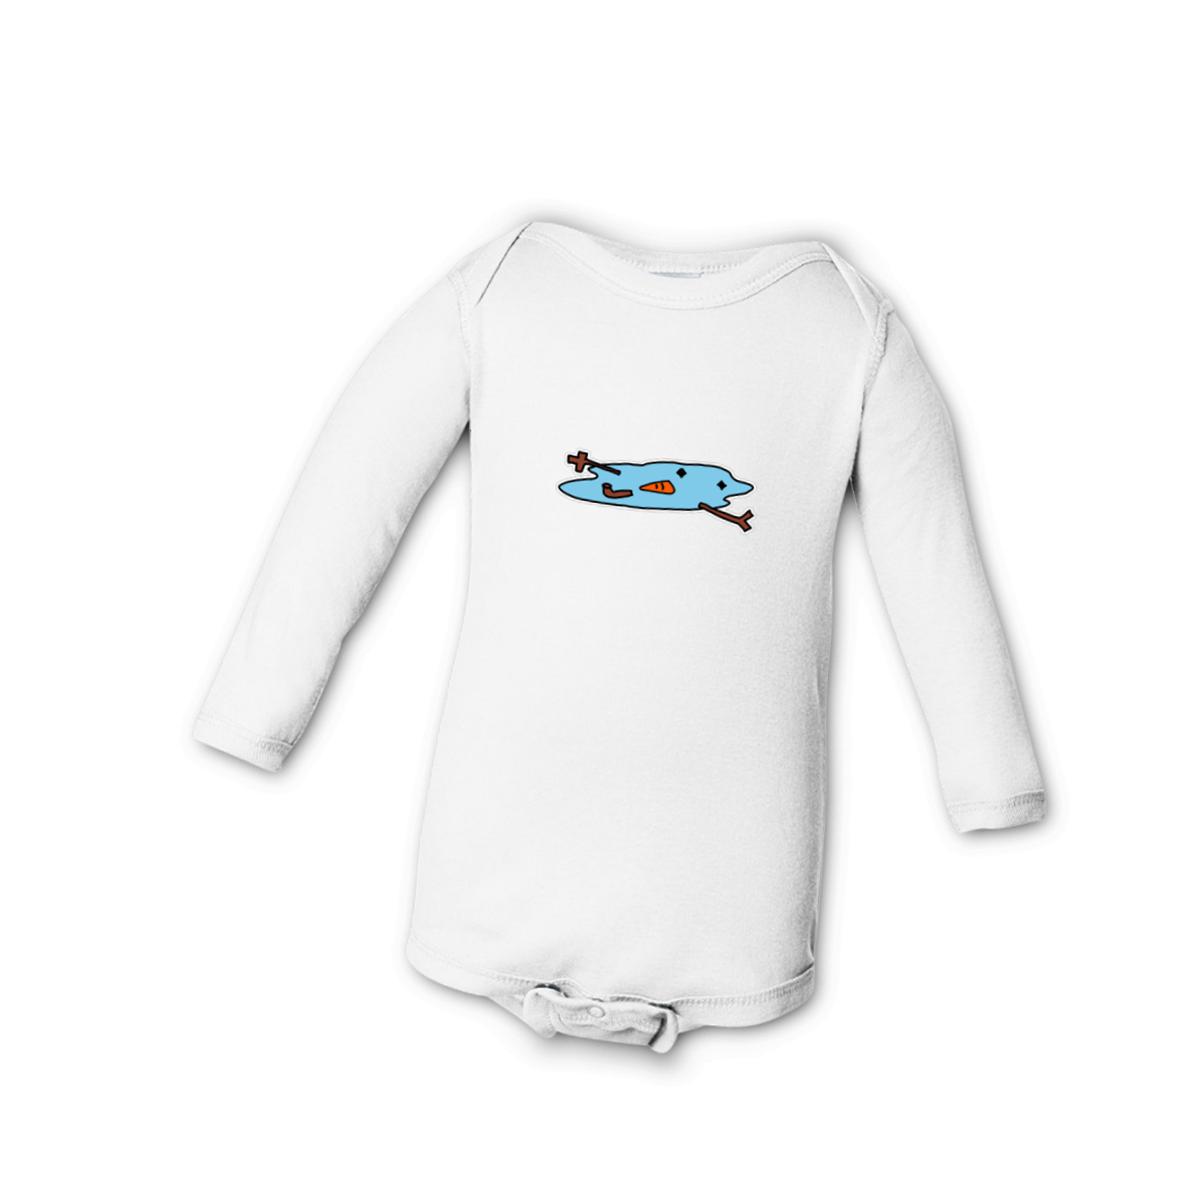 Snowman Puddle Long Sleeve Onesie 6M white